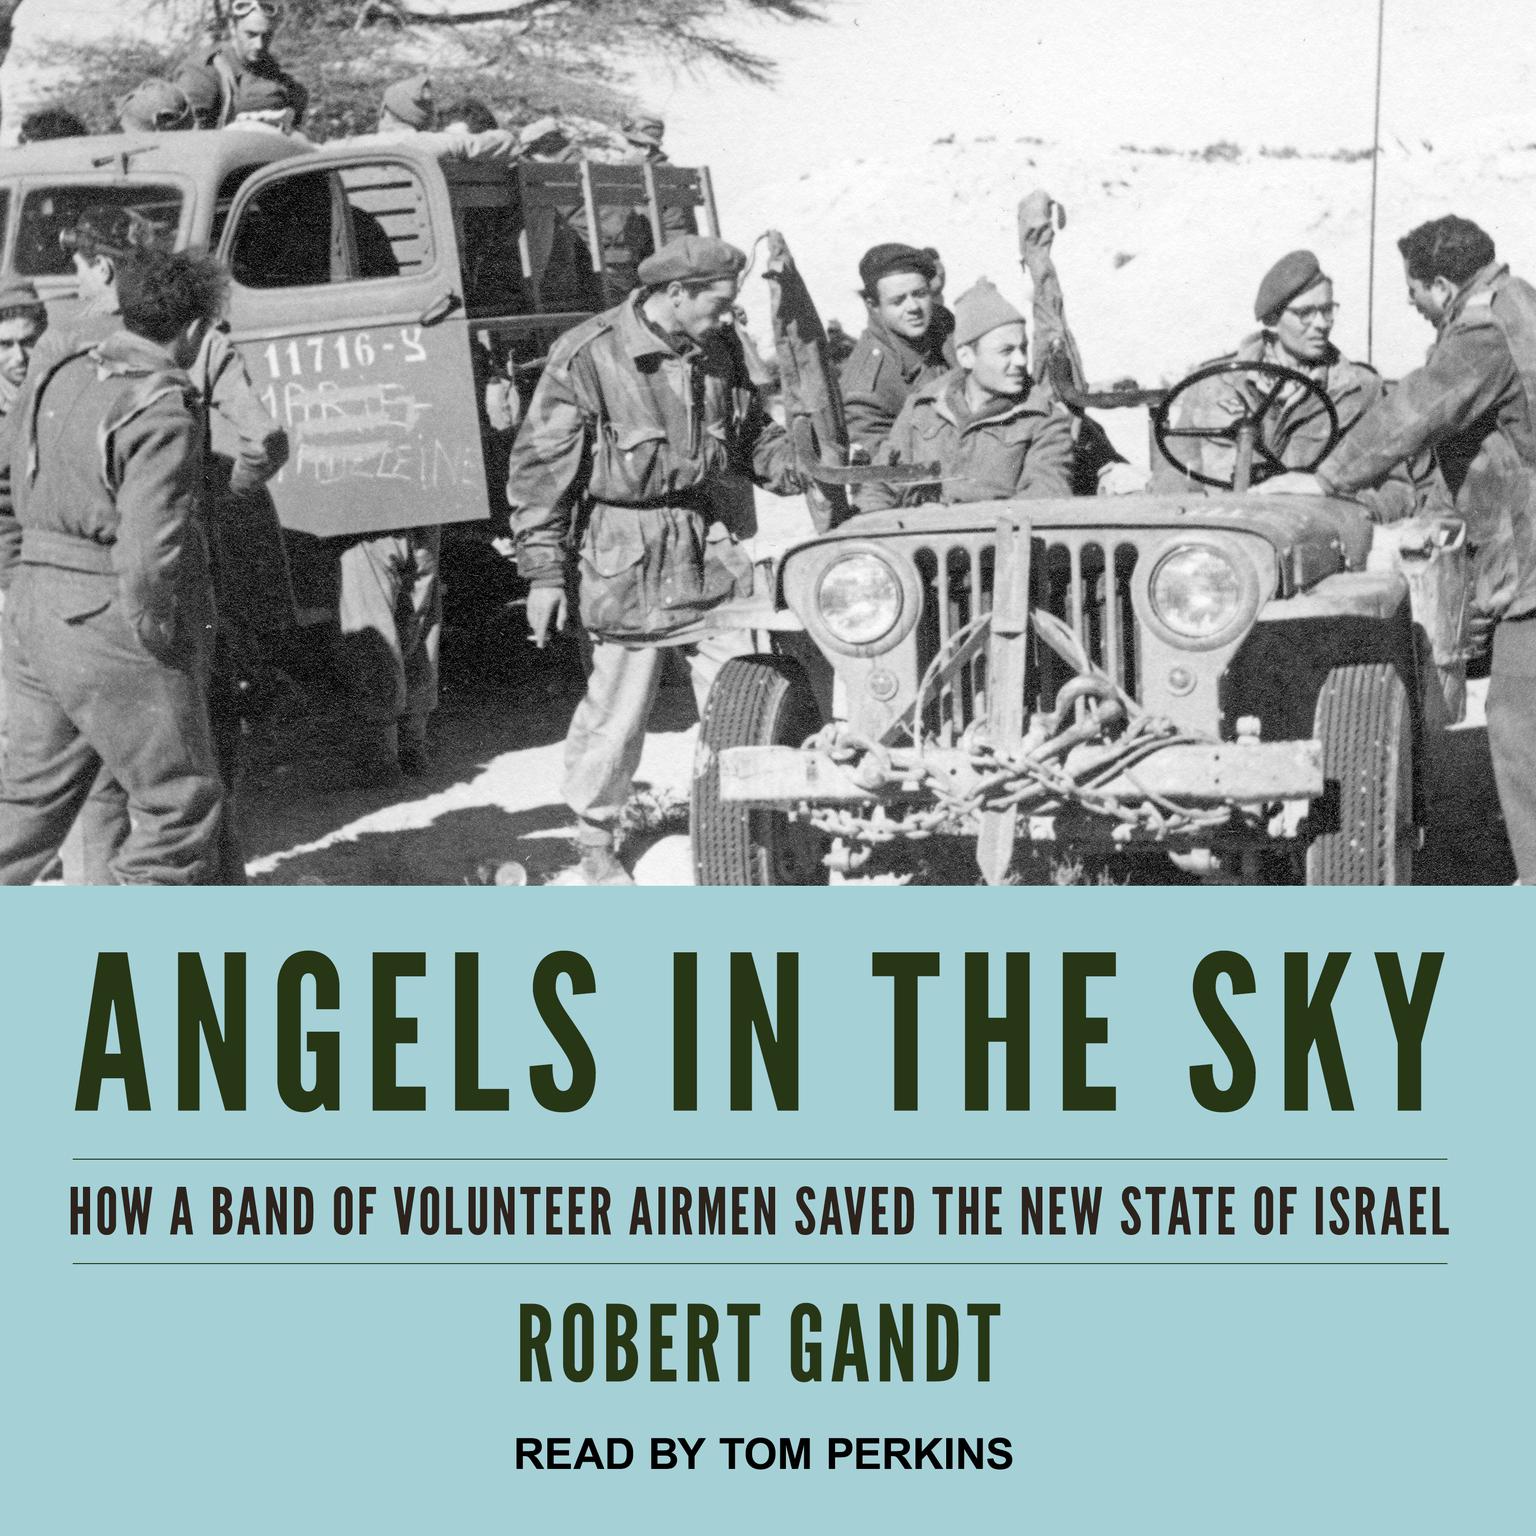 Angels in the Sky: How a Band of Volunteer Airmen Saved the New State of Israel Audiobook, by Robert Gandt